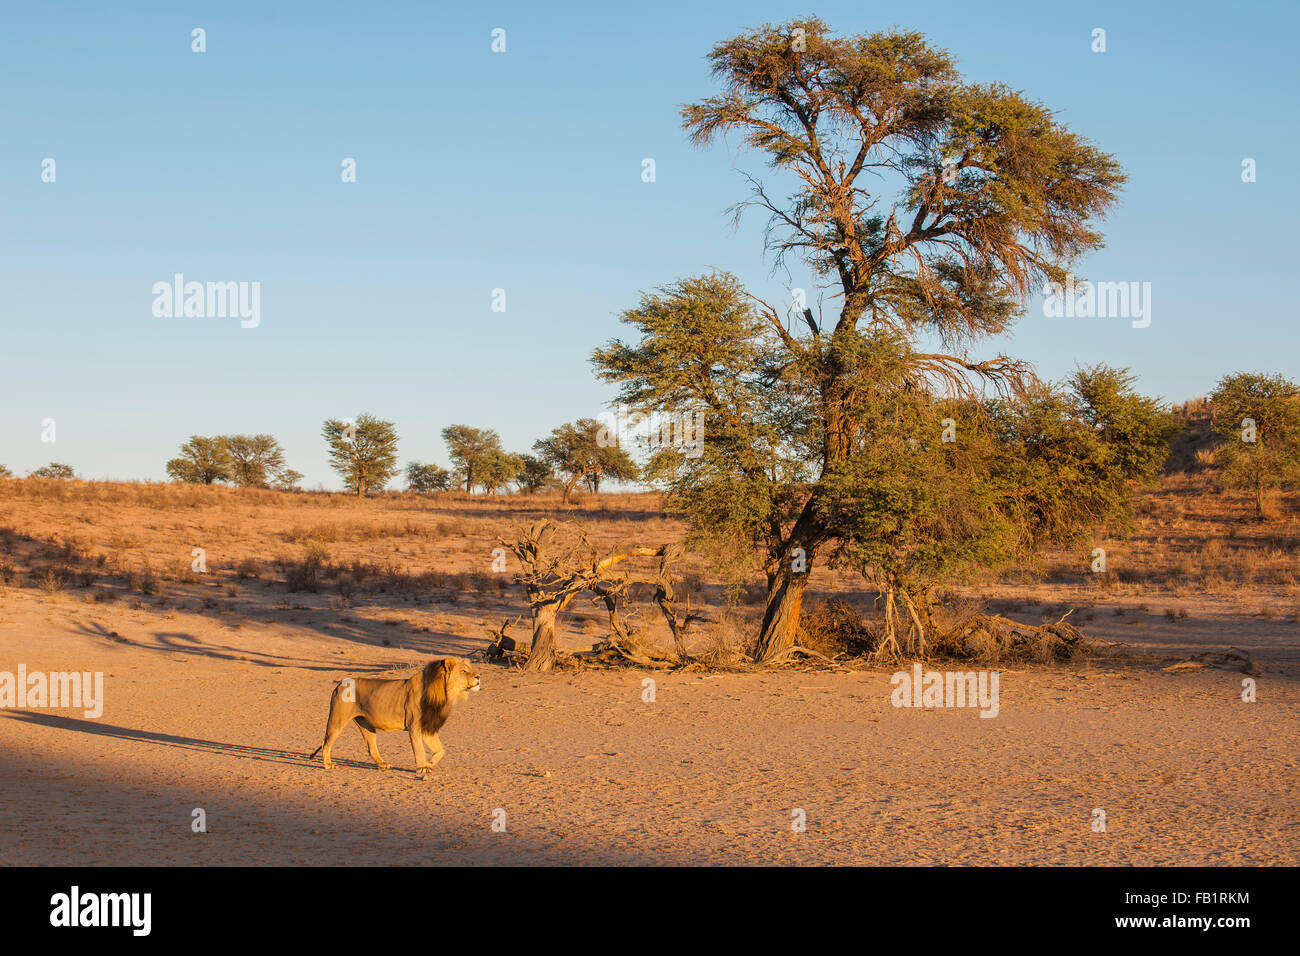 Lion (Panthera leo) crossing a dry riverbed, the Kgalagadi Transfrontier Park, Northern Cape, South Africa Stock Photo